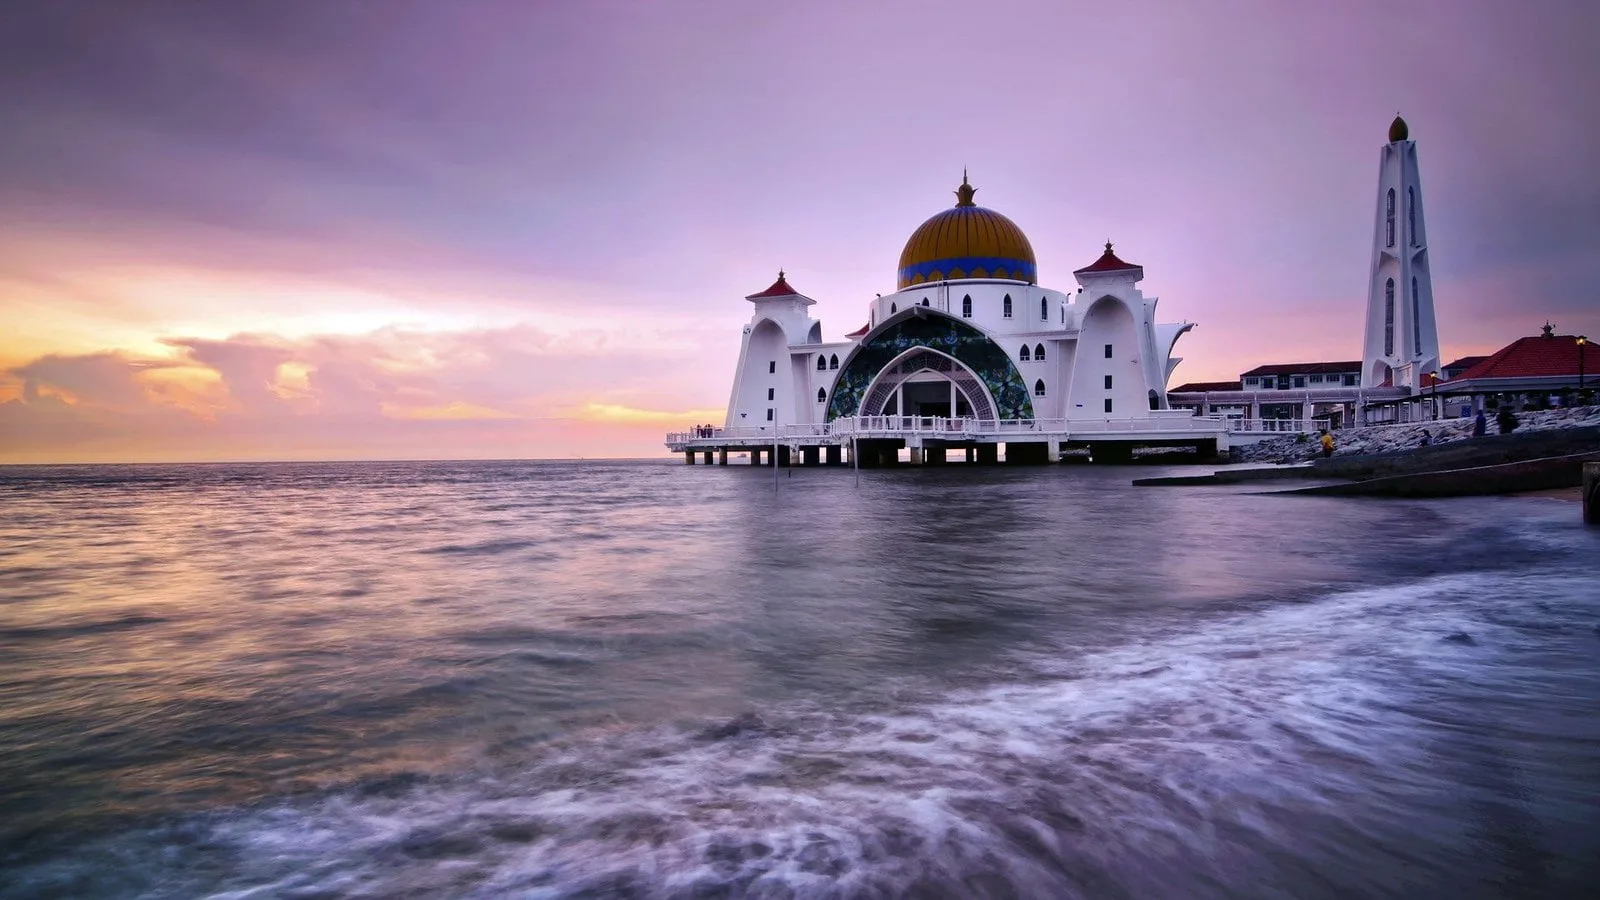 “Malaysia: A Kaleidoscope of Culture, Nature, and Culinary Bliss”